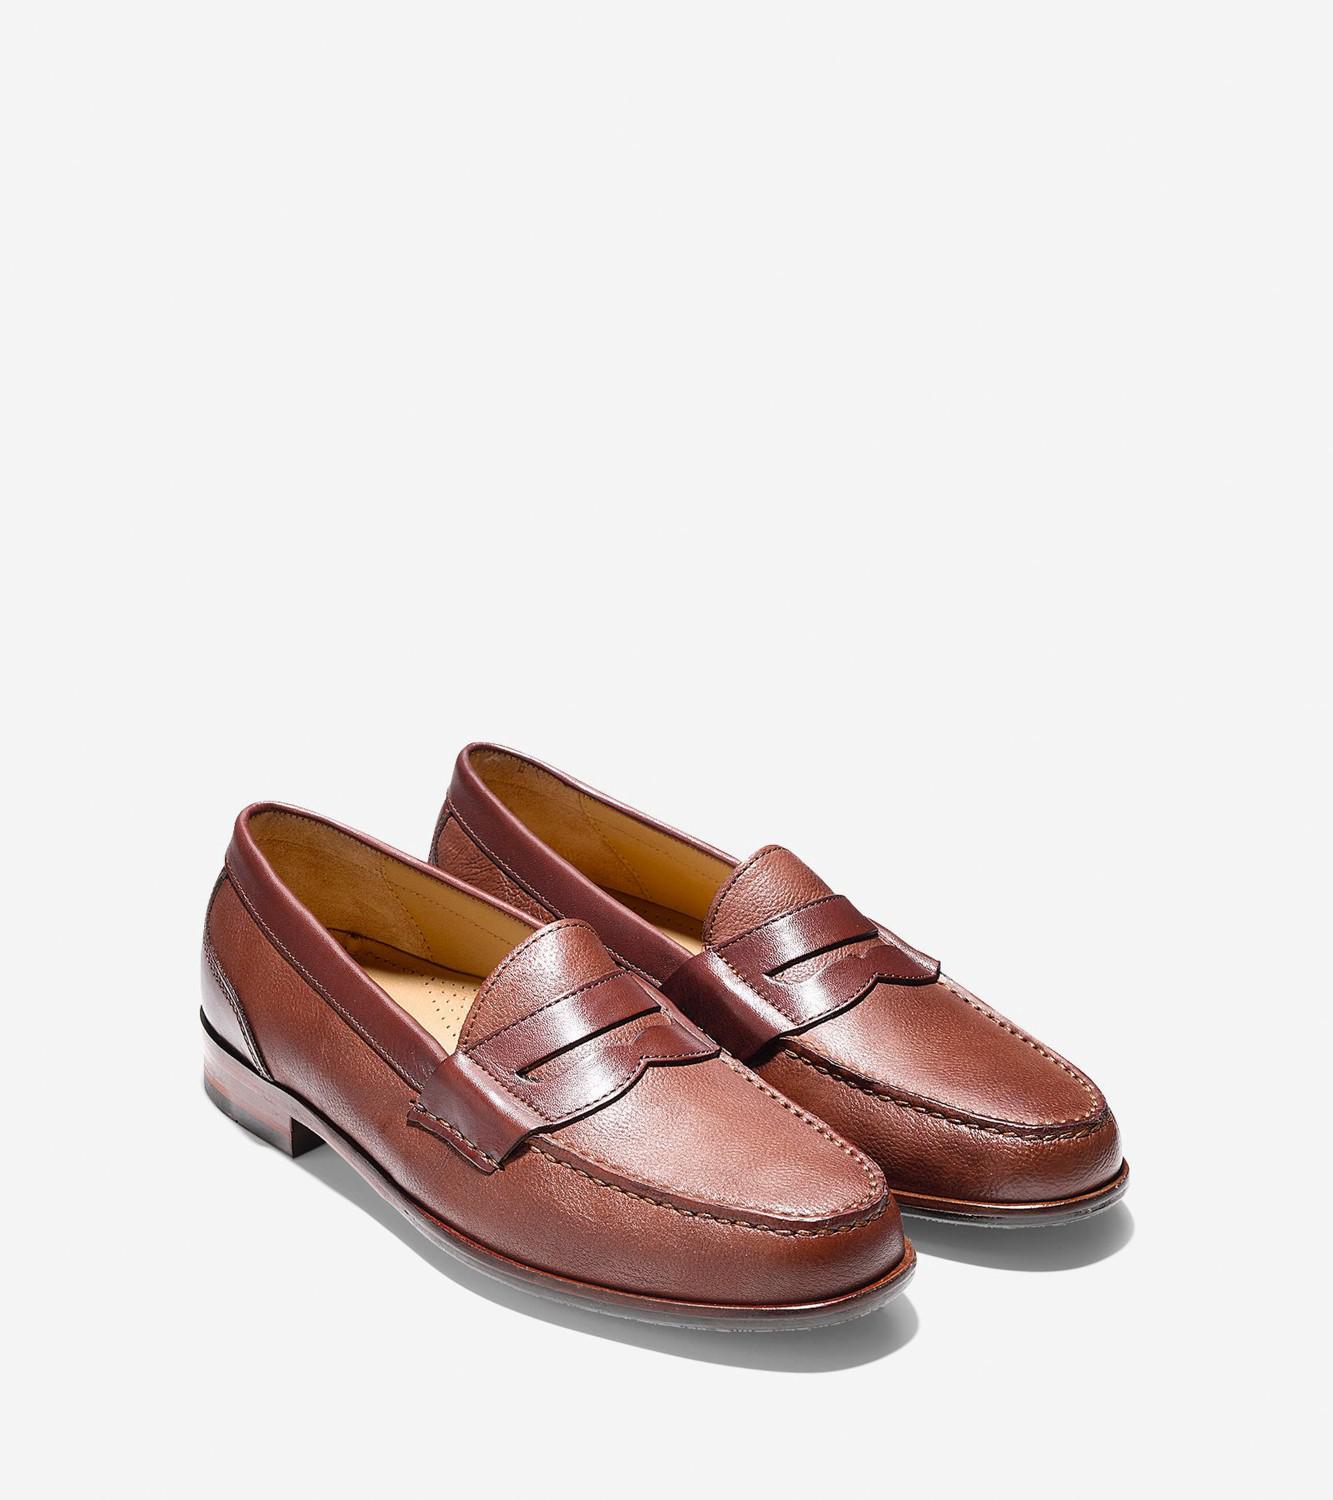 Lyst - Cole Haan Fairmont Penny Loafer for Men